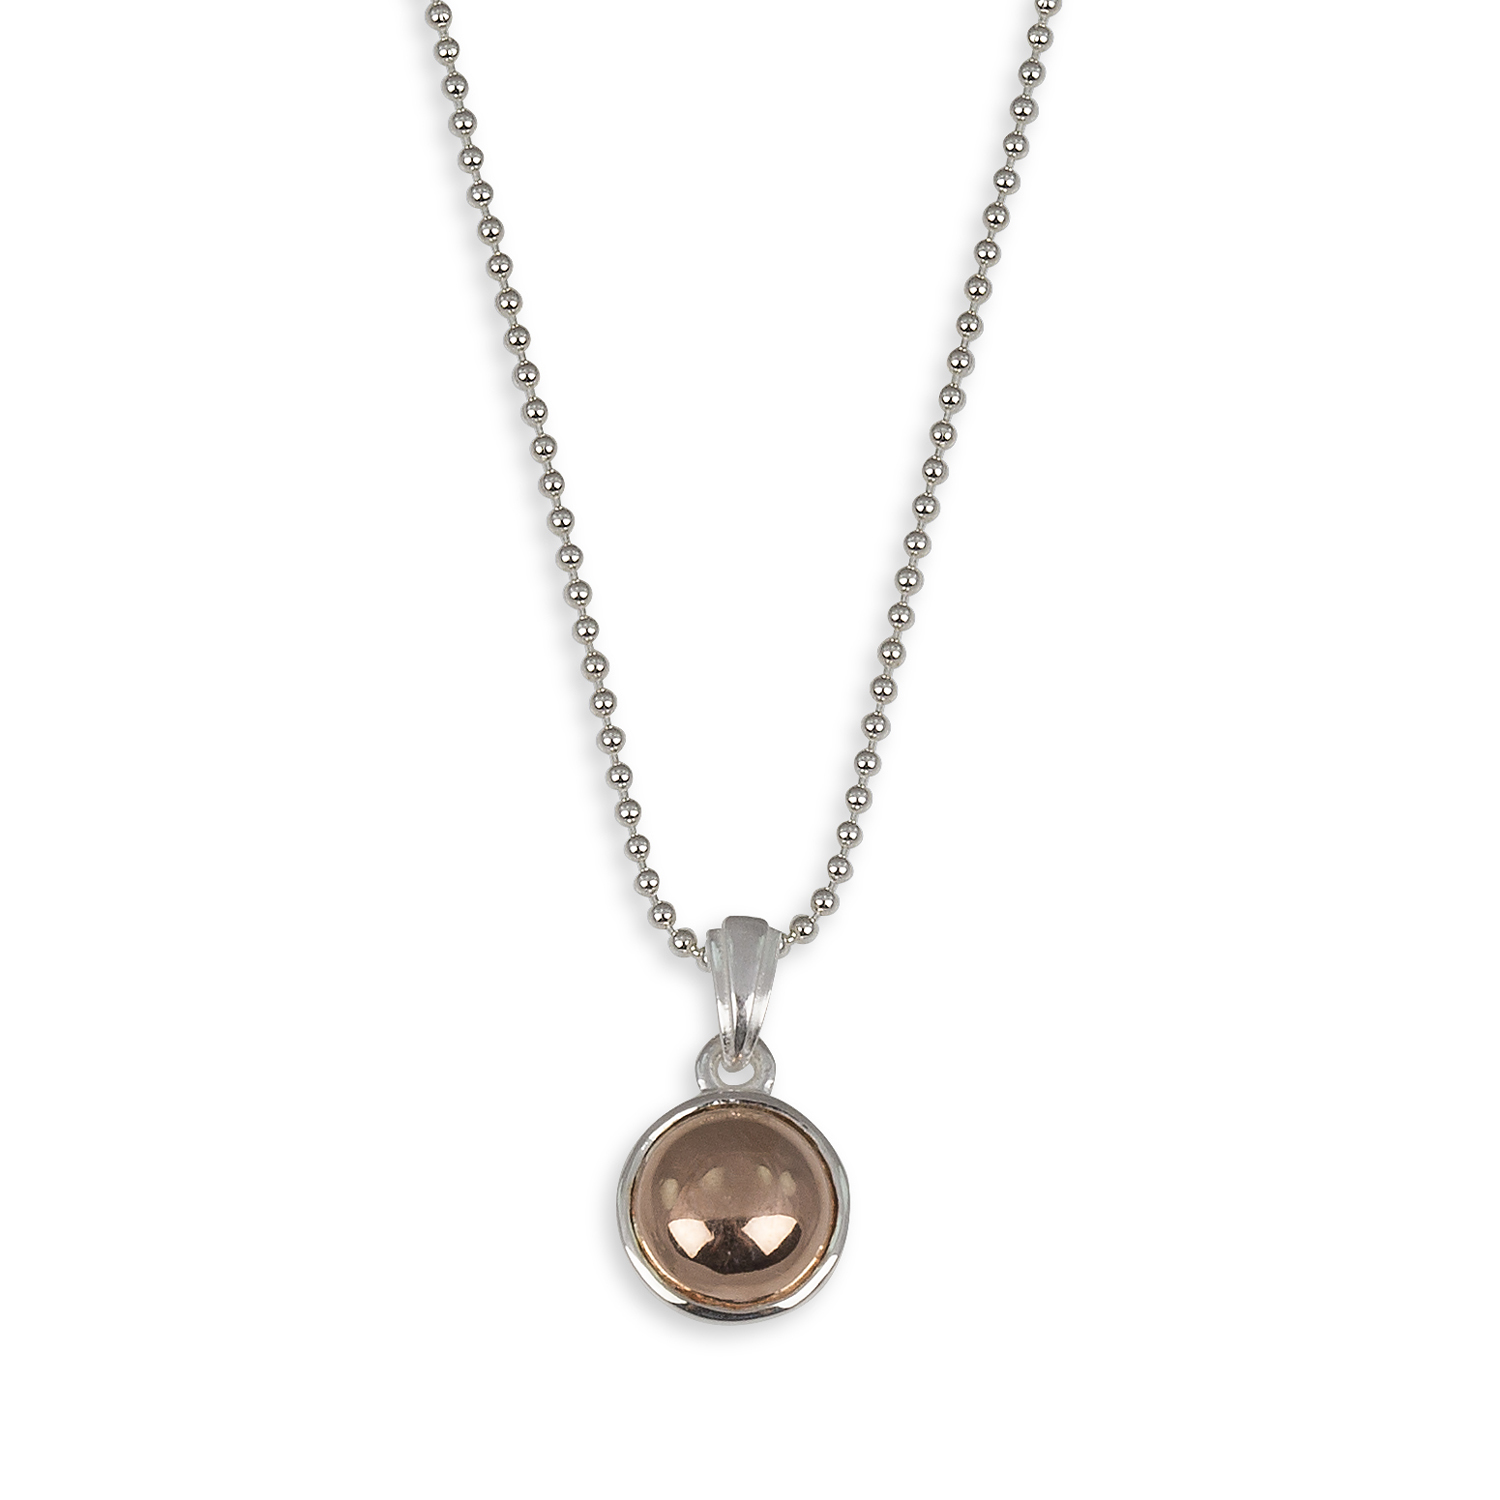 BALL CHAIN ONE ROUND NECKLACE